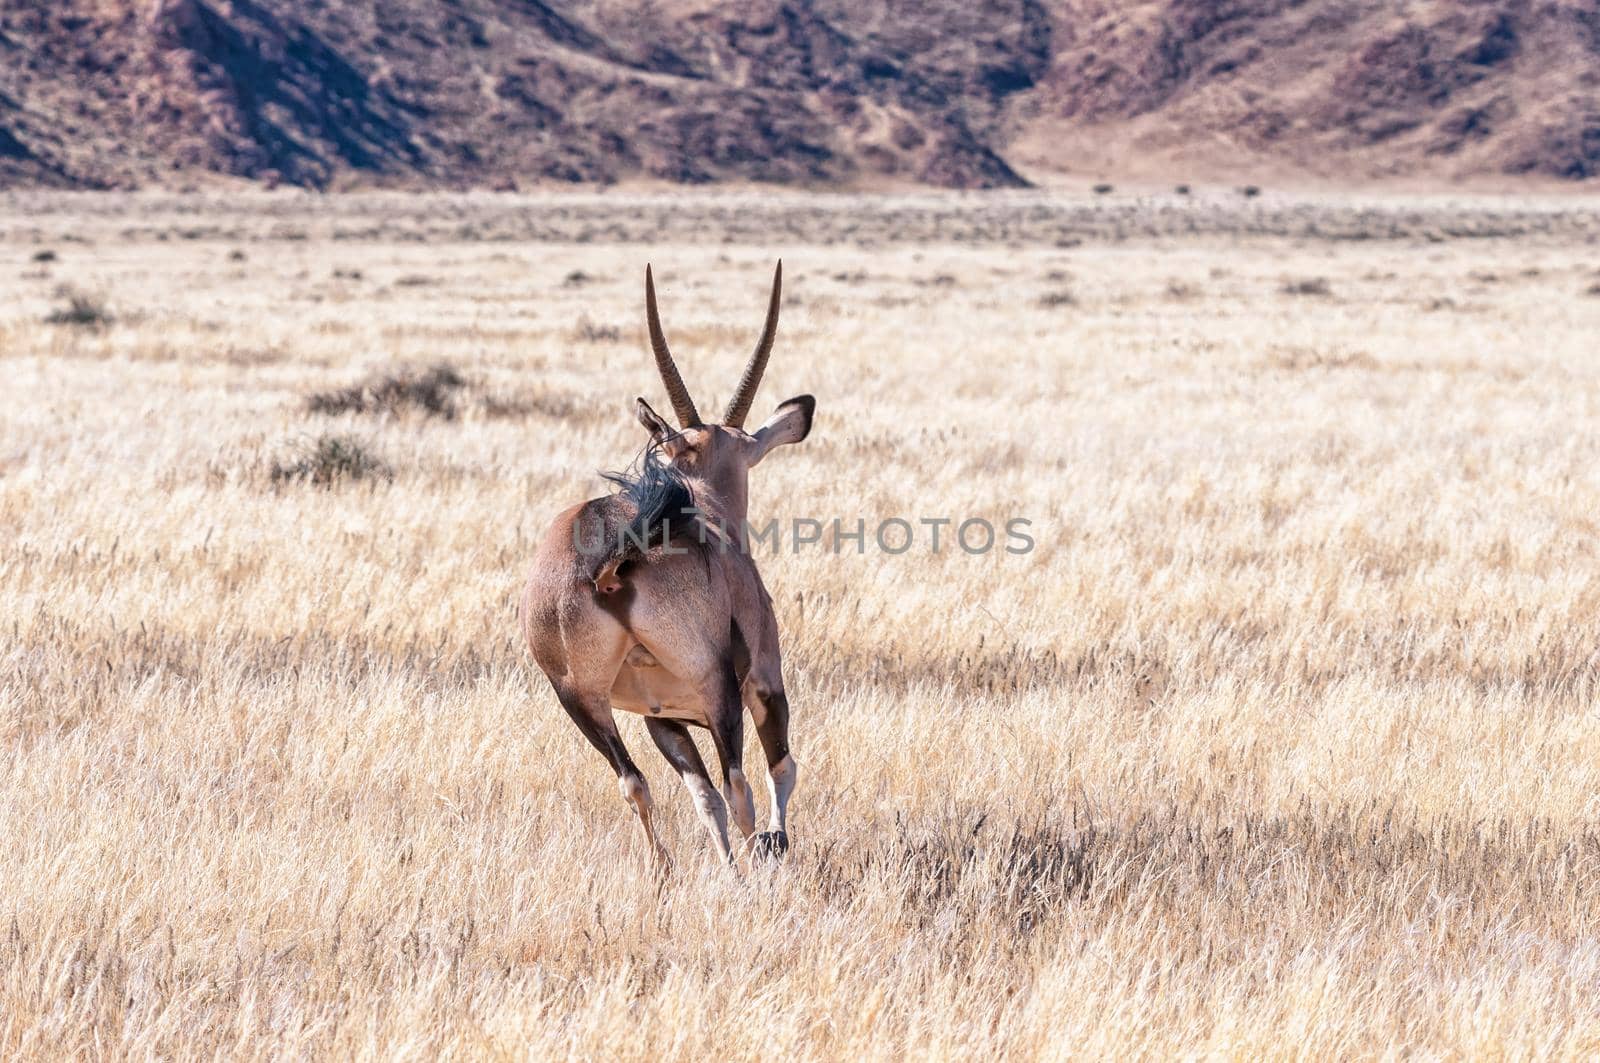 An oryx, also called gemsbok, Oryx gazella, running away from the camera in southern Namibia